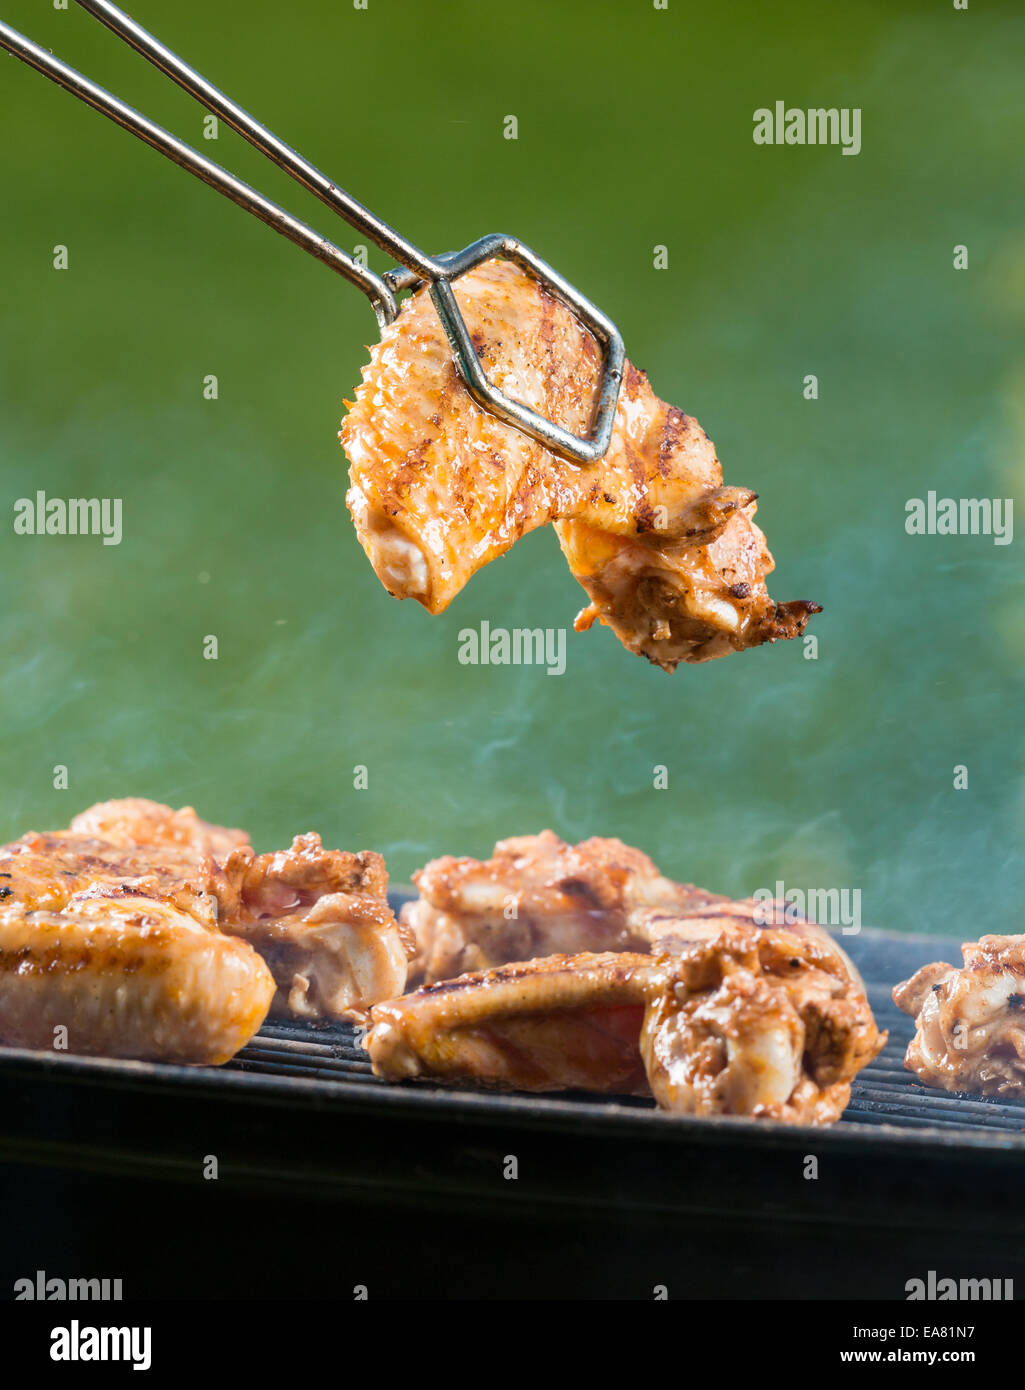 Chicken wings on barbecue grill with fire Stock Photo